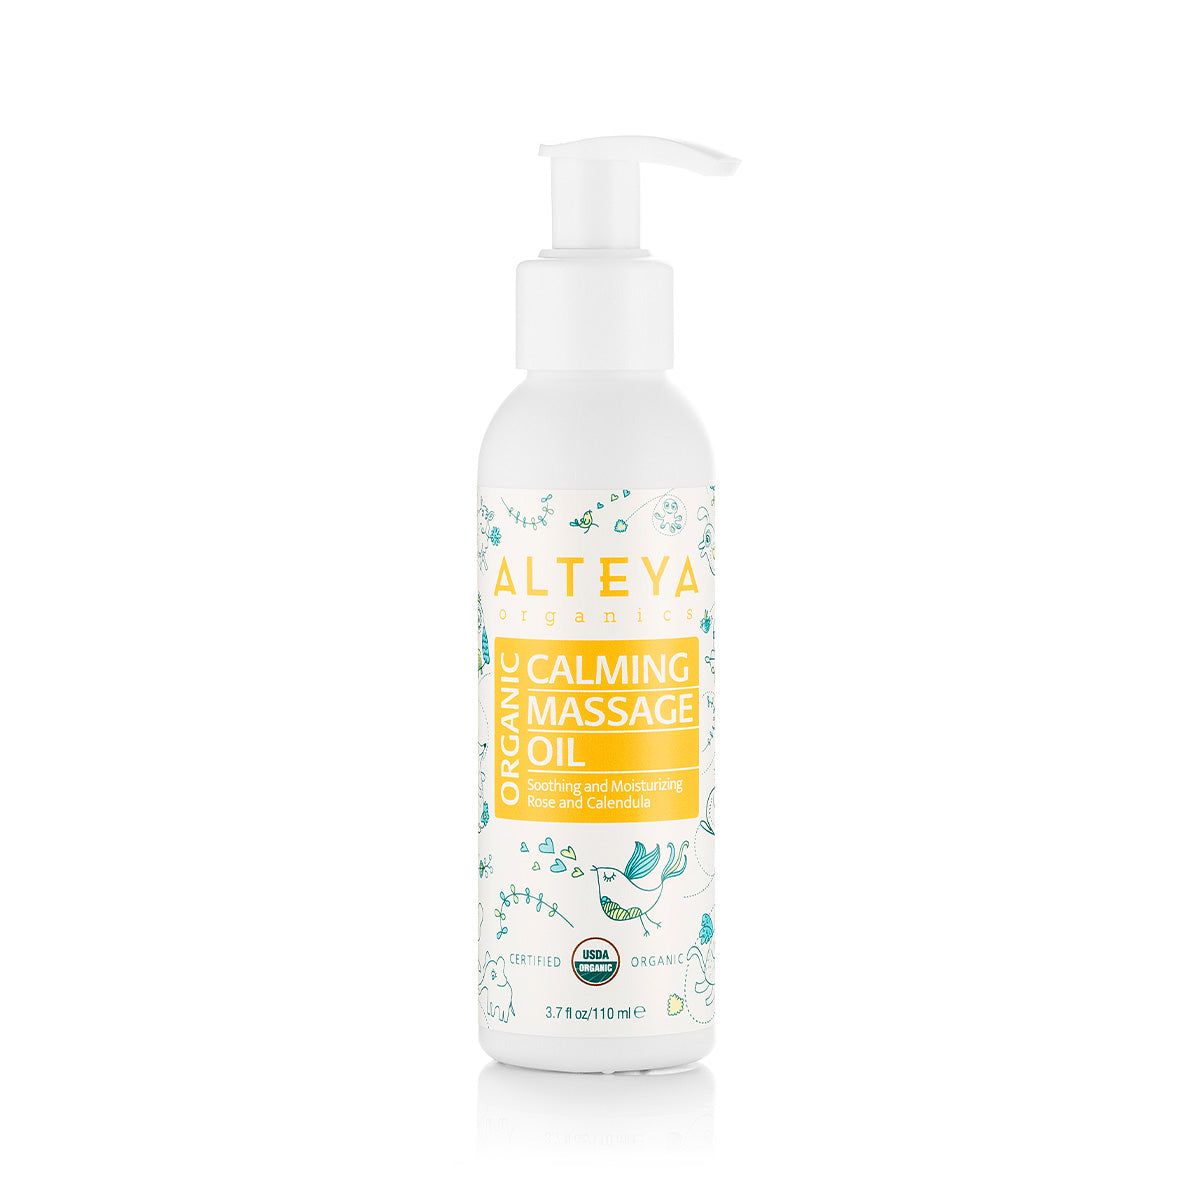 An Alteya Organics bottle of Baby Massage Oil Certified organic, a gentle oil ideal for baby care, resting on a white background.